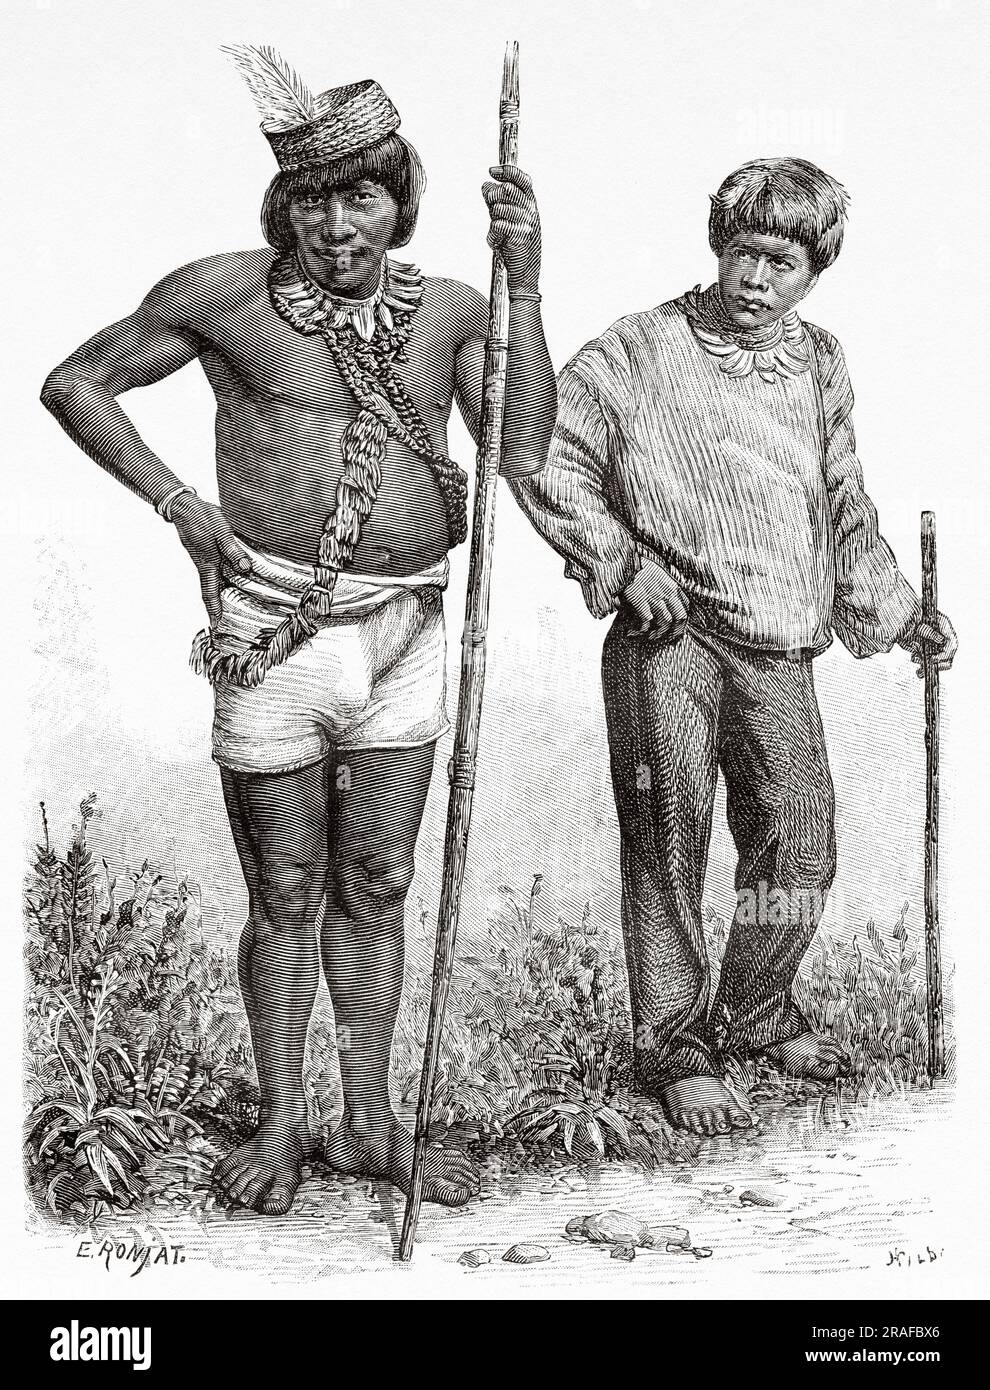 The Huambisa indigenous interpreter. Indian from the Patuca river dressed in the clothes of the sailors of the boat. Peru, South America. Amazon and mountain ranges by Charles Wiener Mahler, 1879-1882. Old 19th century engraving from Le Tour du Monde 1906 Stock Photo